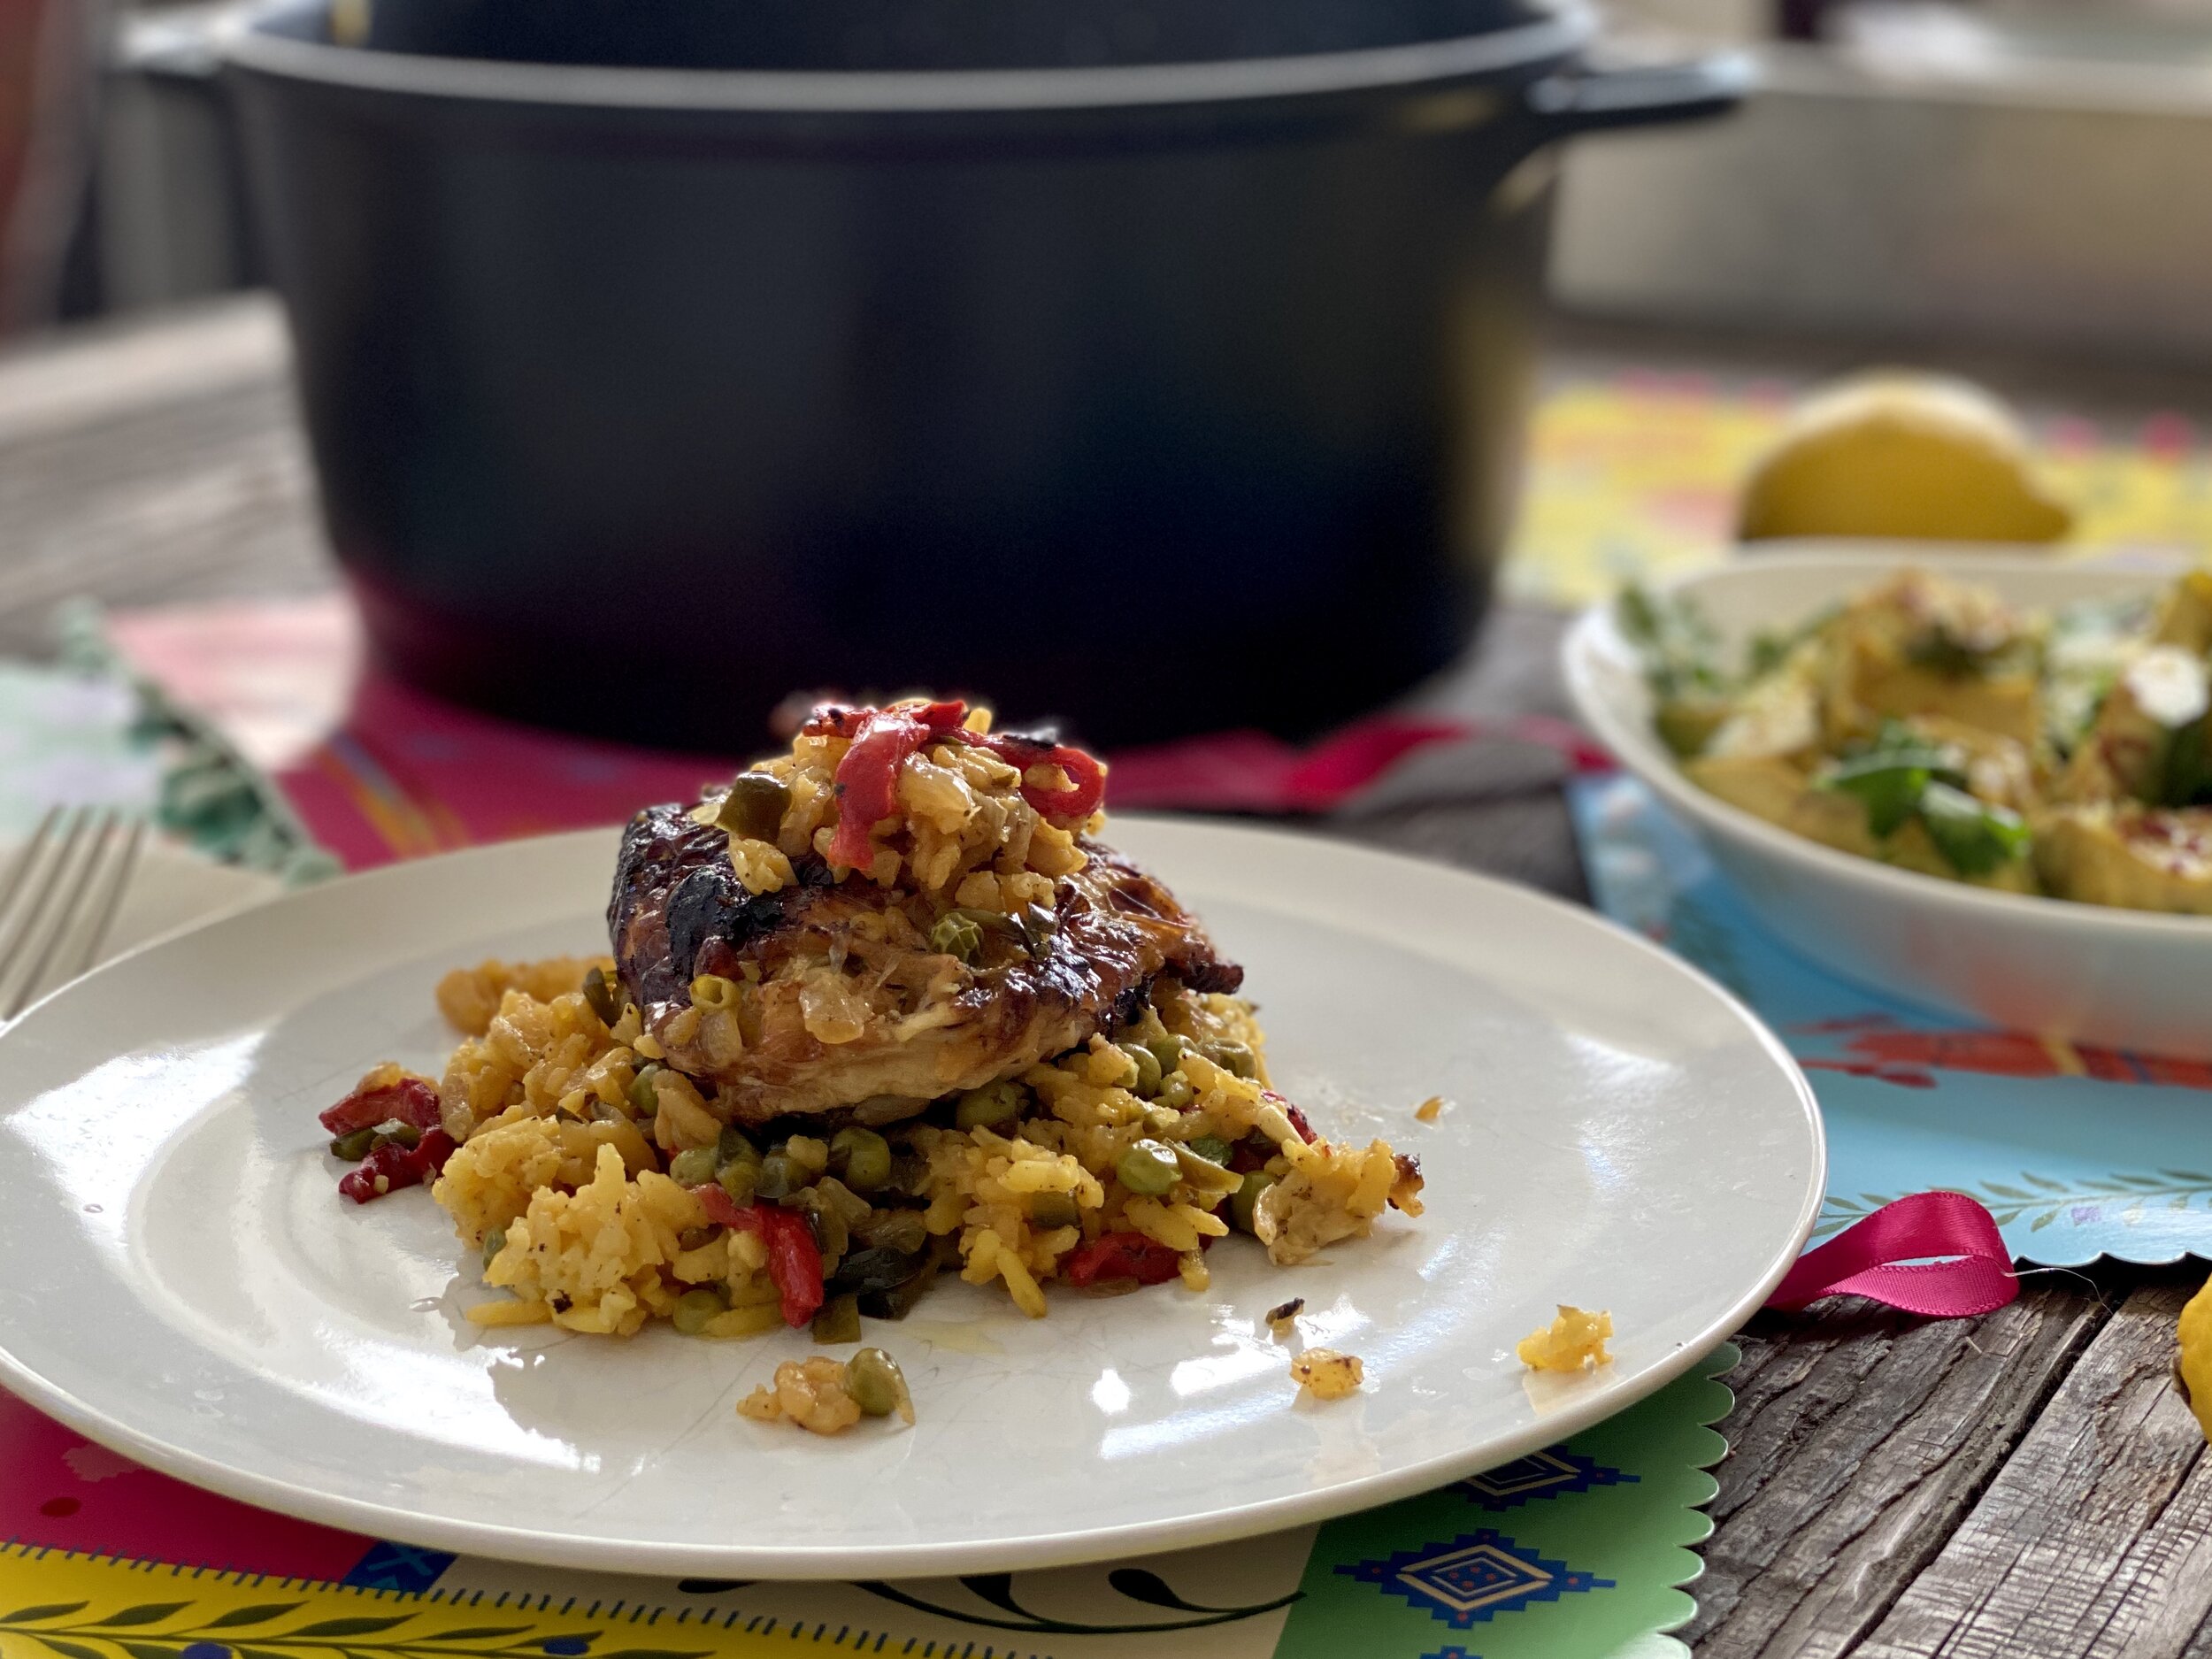 Ana’s mother’s recipe for Arroz Con Pollo along with her favorite avocado salad.